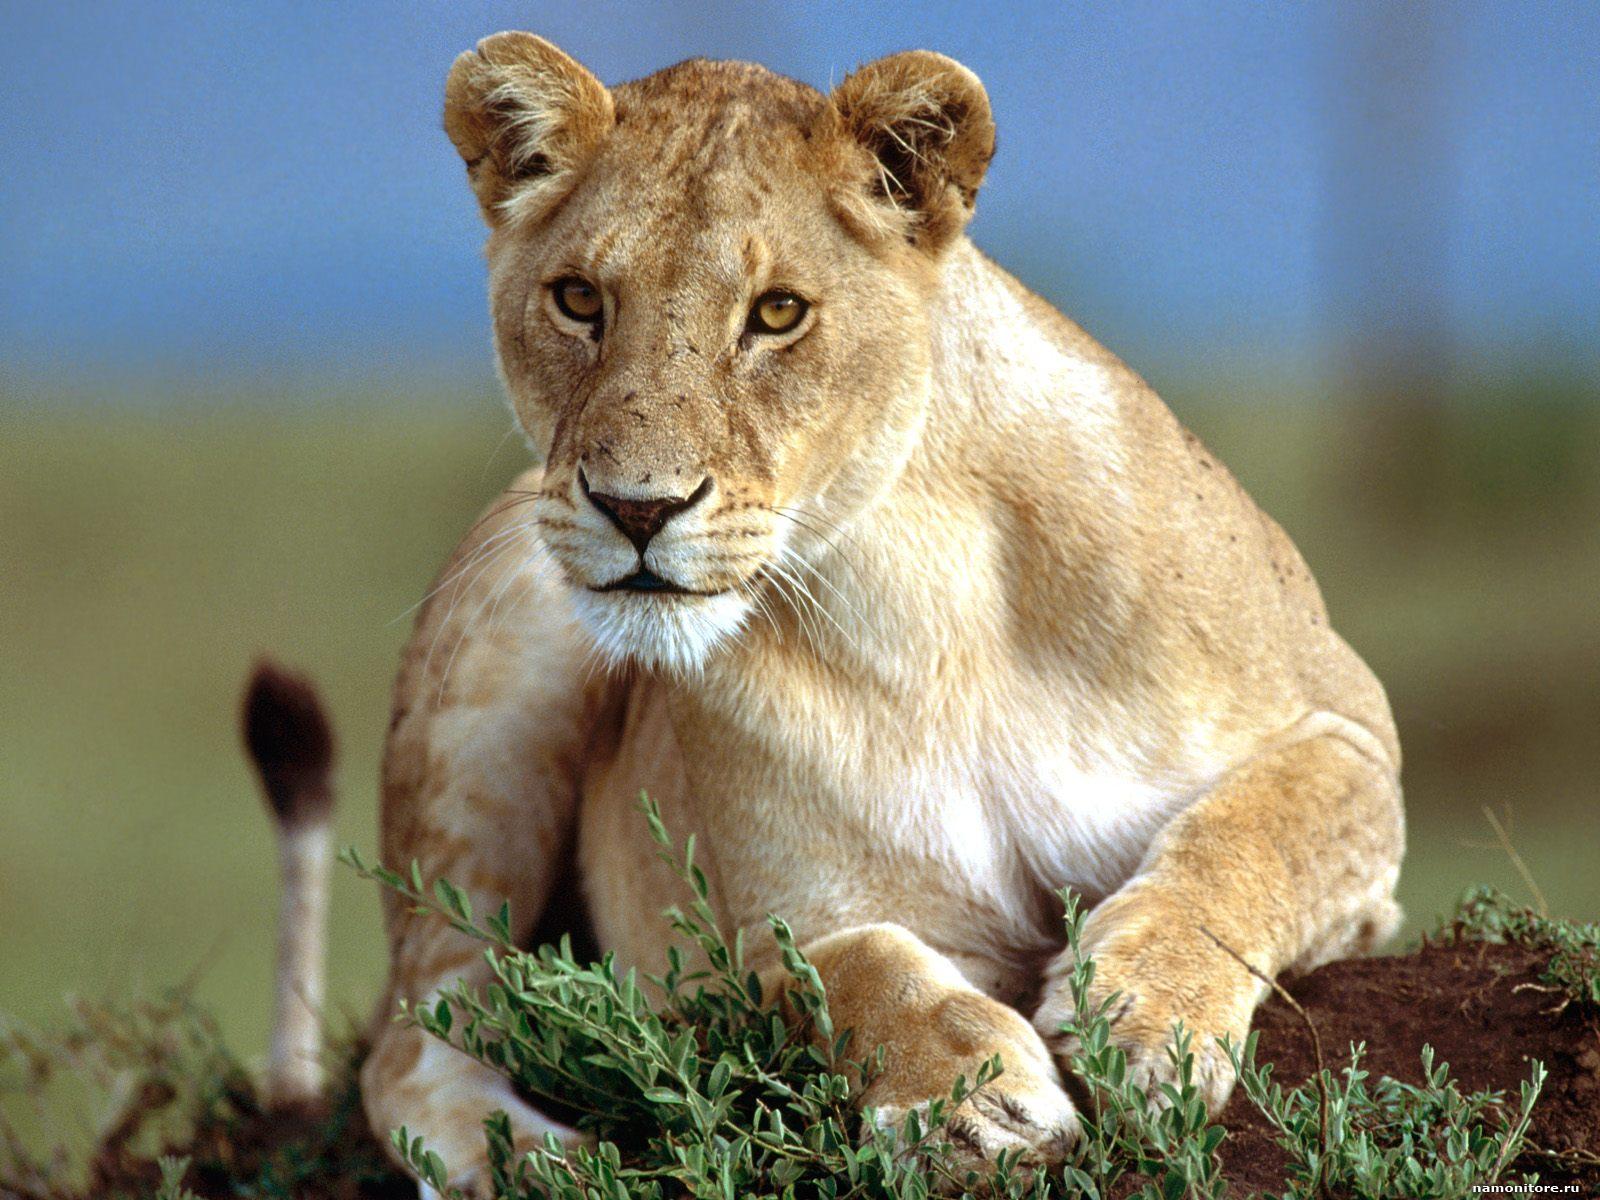 Photo of a lioness